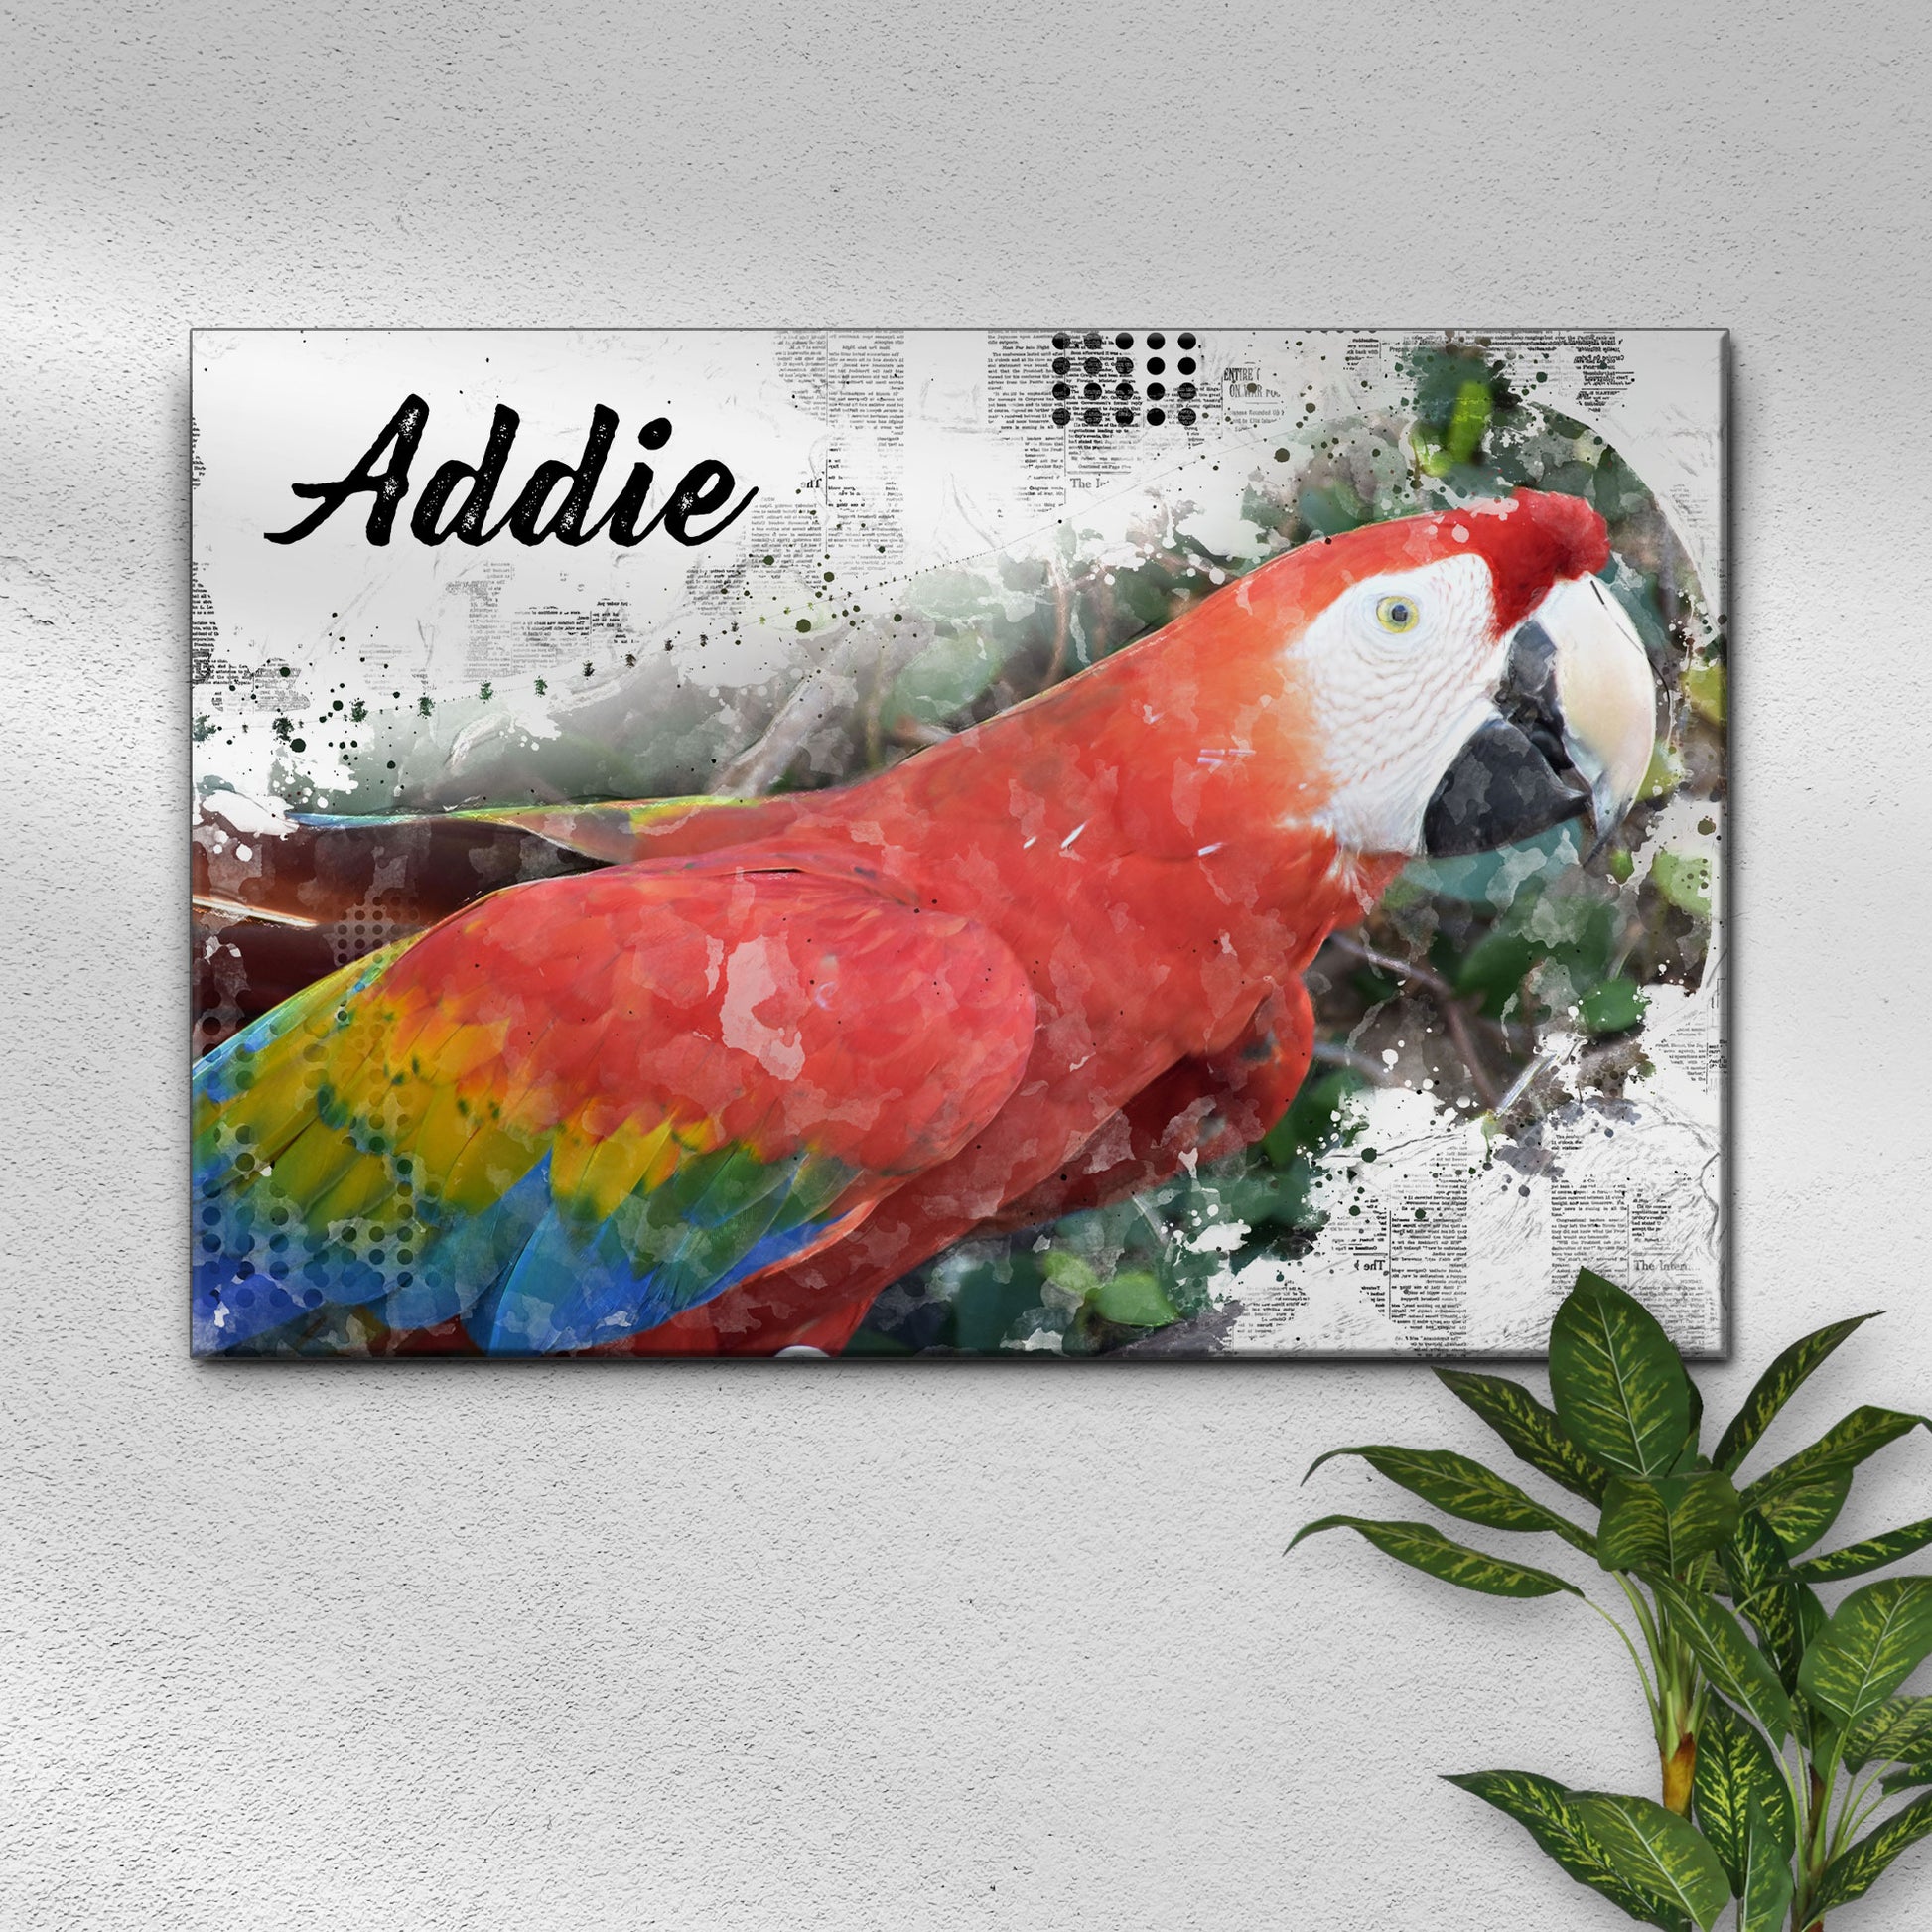 Parrot Editorial Media Sign Style 2 - Image by Tailored Canvases